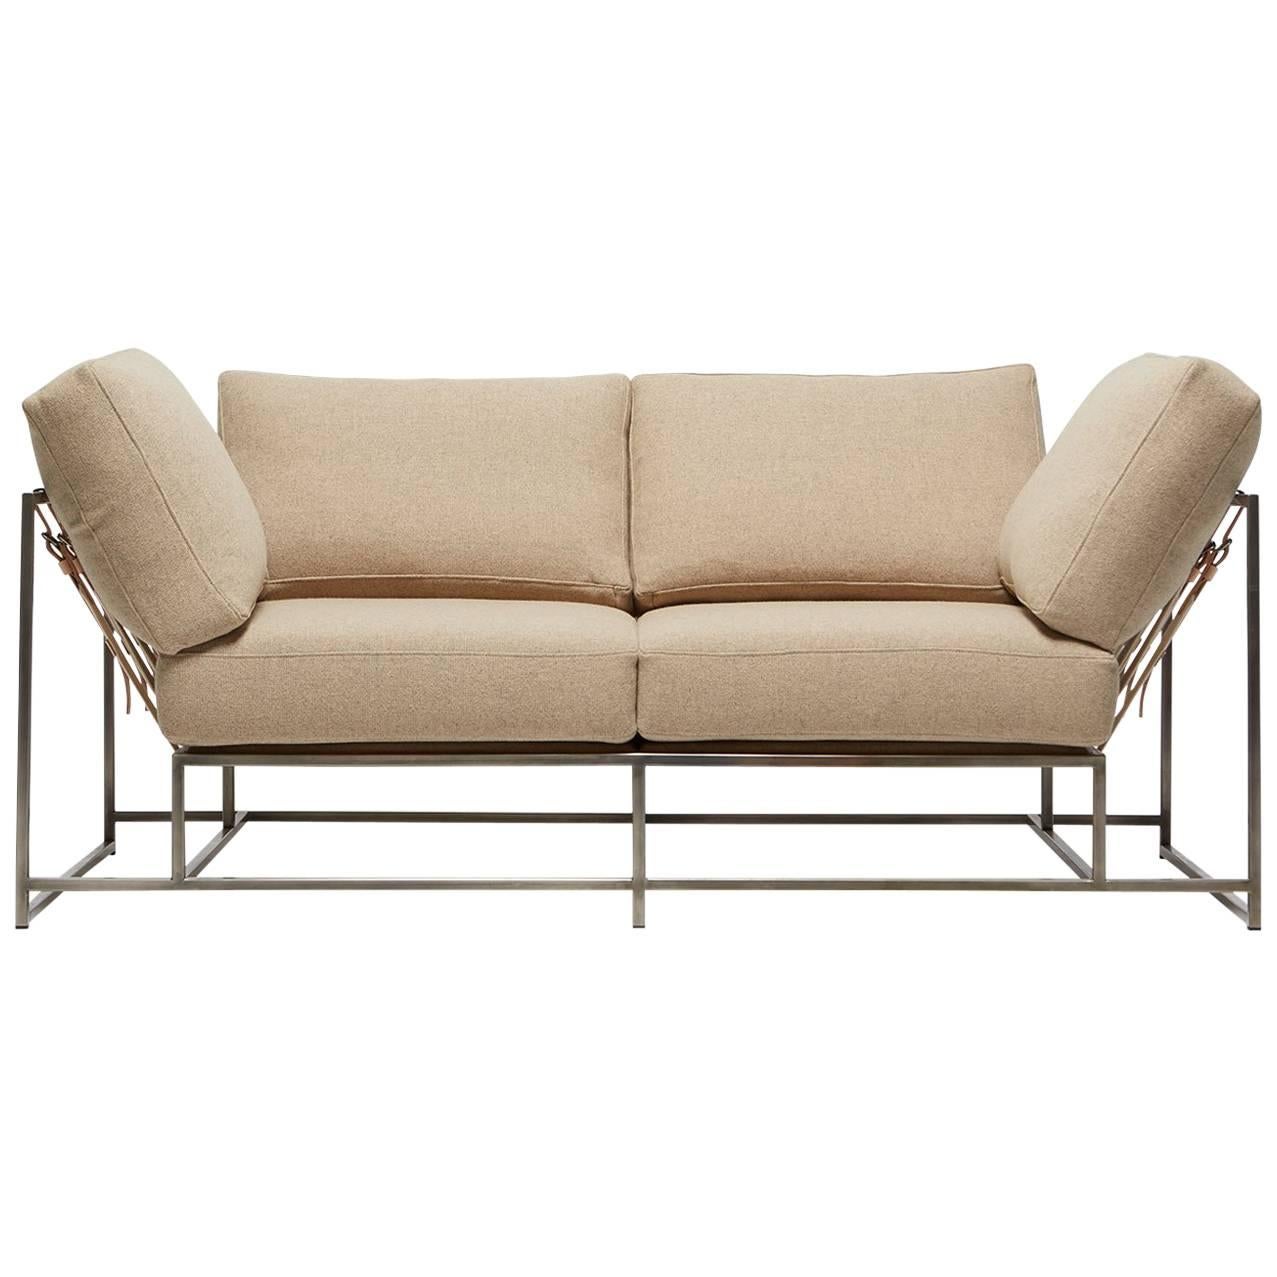 Tan Wool and Antique Nickel Two-Seat Sofa For Sale